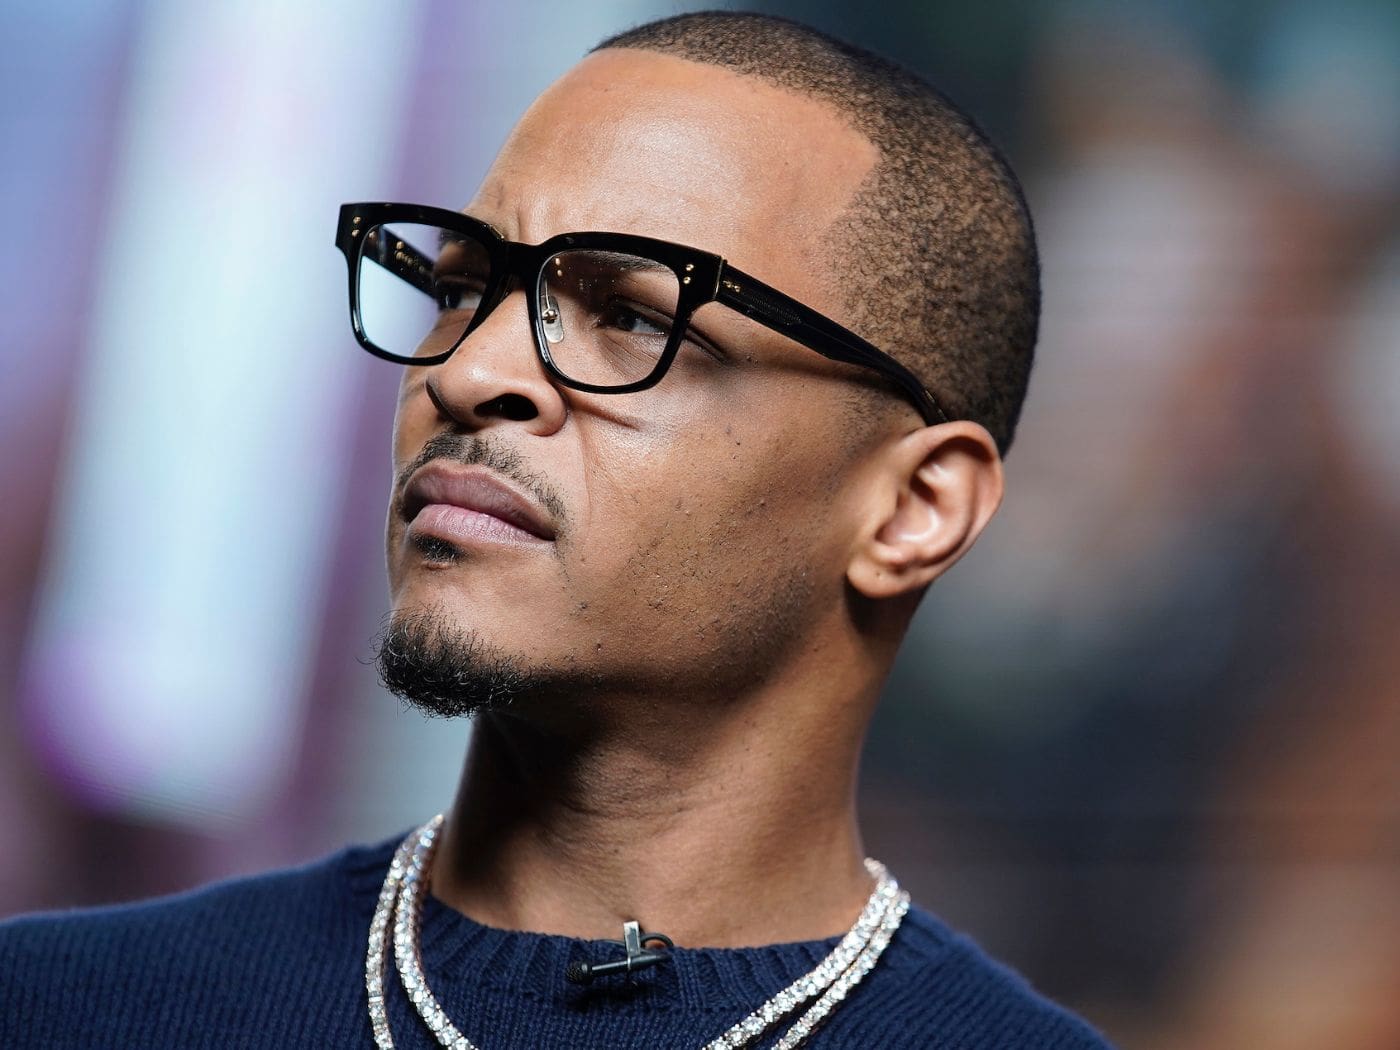 T.I. Praises Keisha Bottoms Following Her Latest Moves - Some Fans Are Outraged